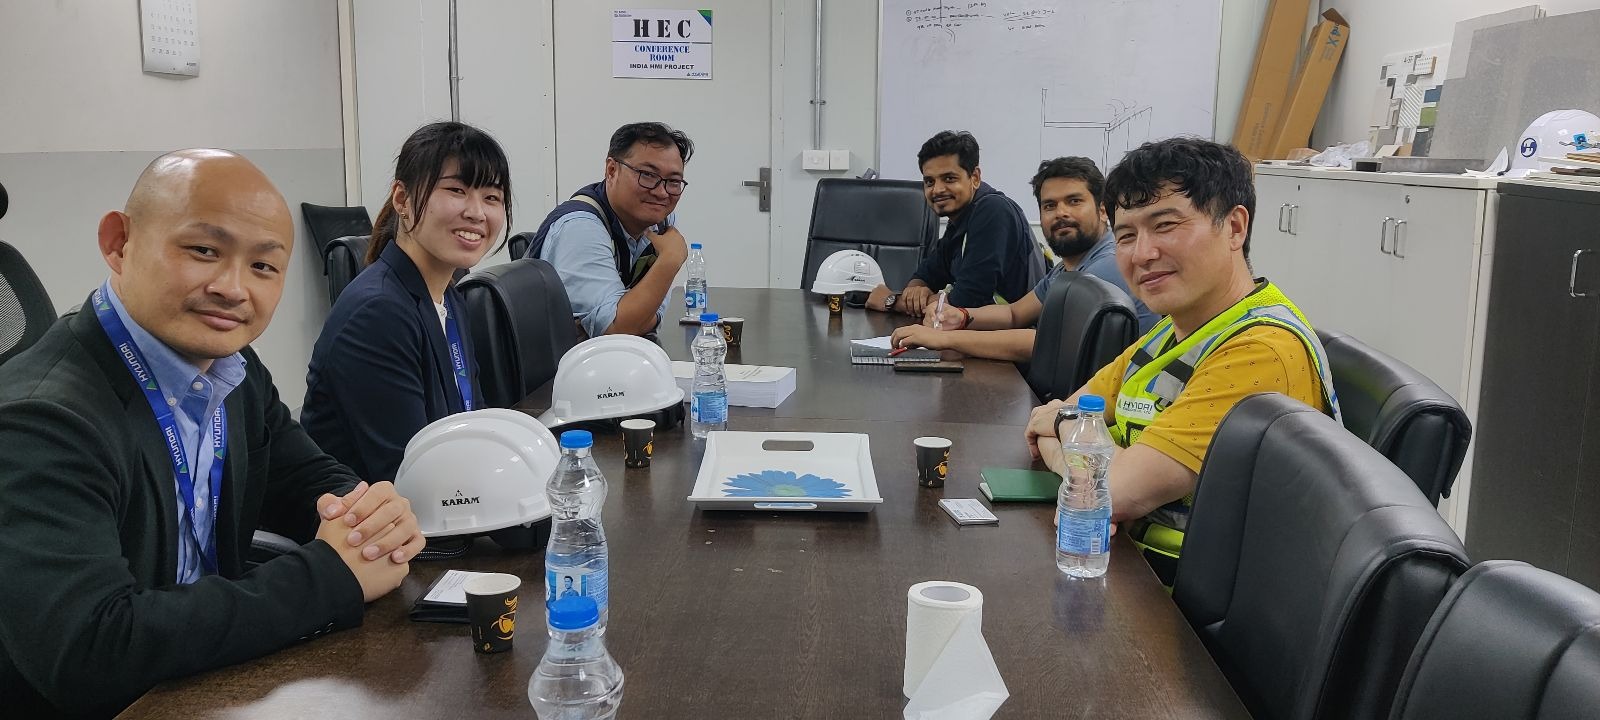 Discussion with Hyundia team